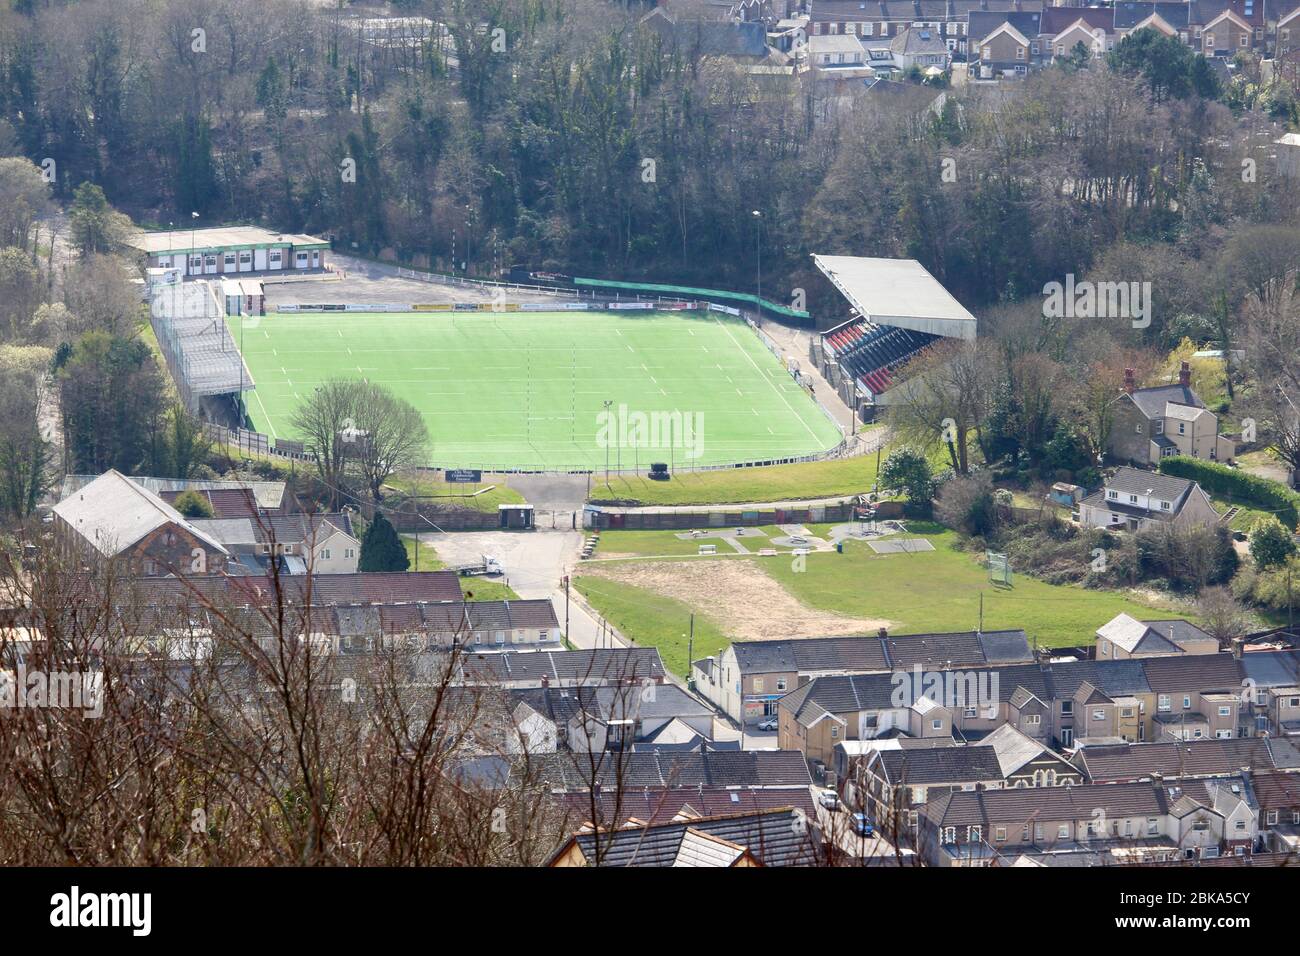 A photograph of the Sardis Road Pontypridd rugby club in March 2020 during the coronavirus lockdown.  Deserted playing field. Stock Photo